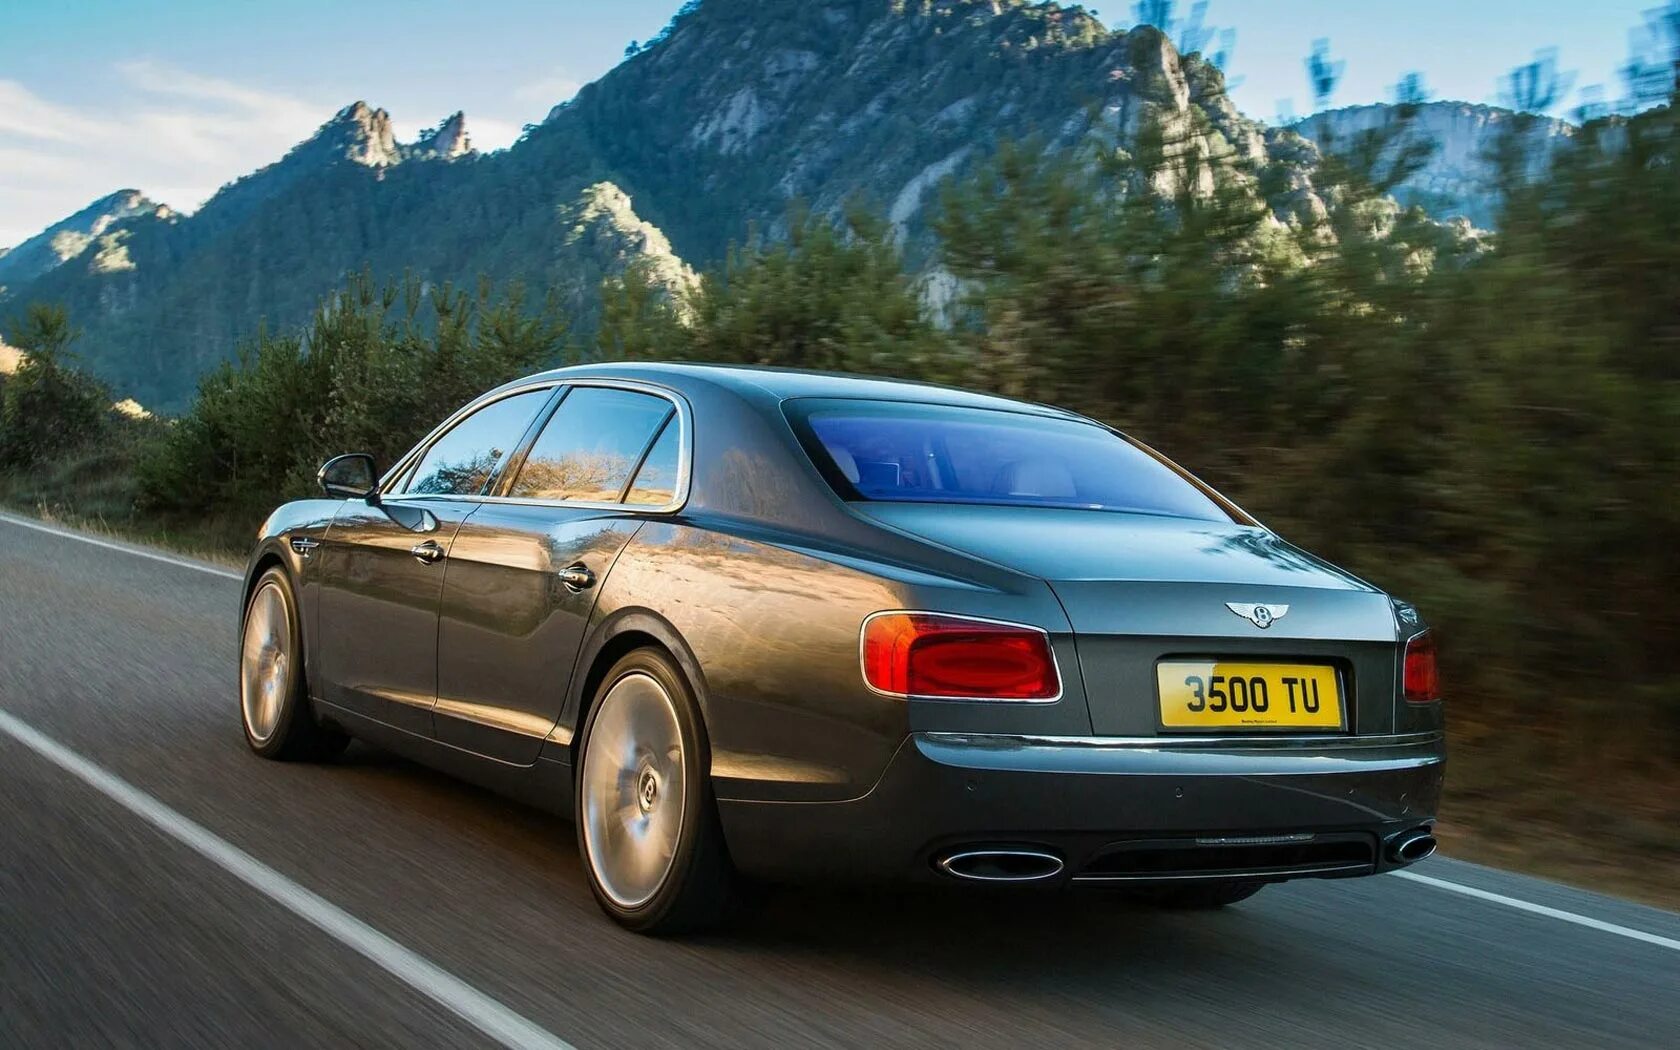 Бентли continental flying spur. Bentley Flying Spur. Седан Bentley Flying Spur. Bentley Continental Flying Spur.